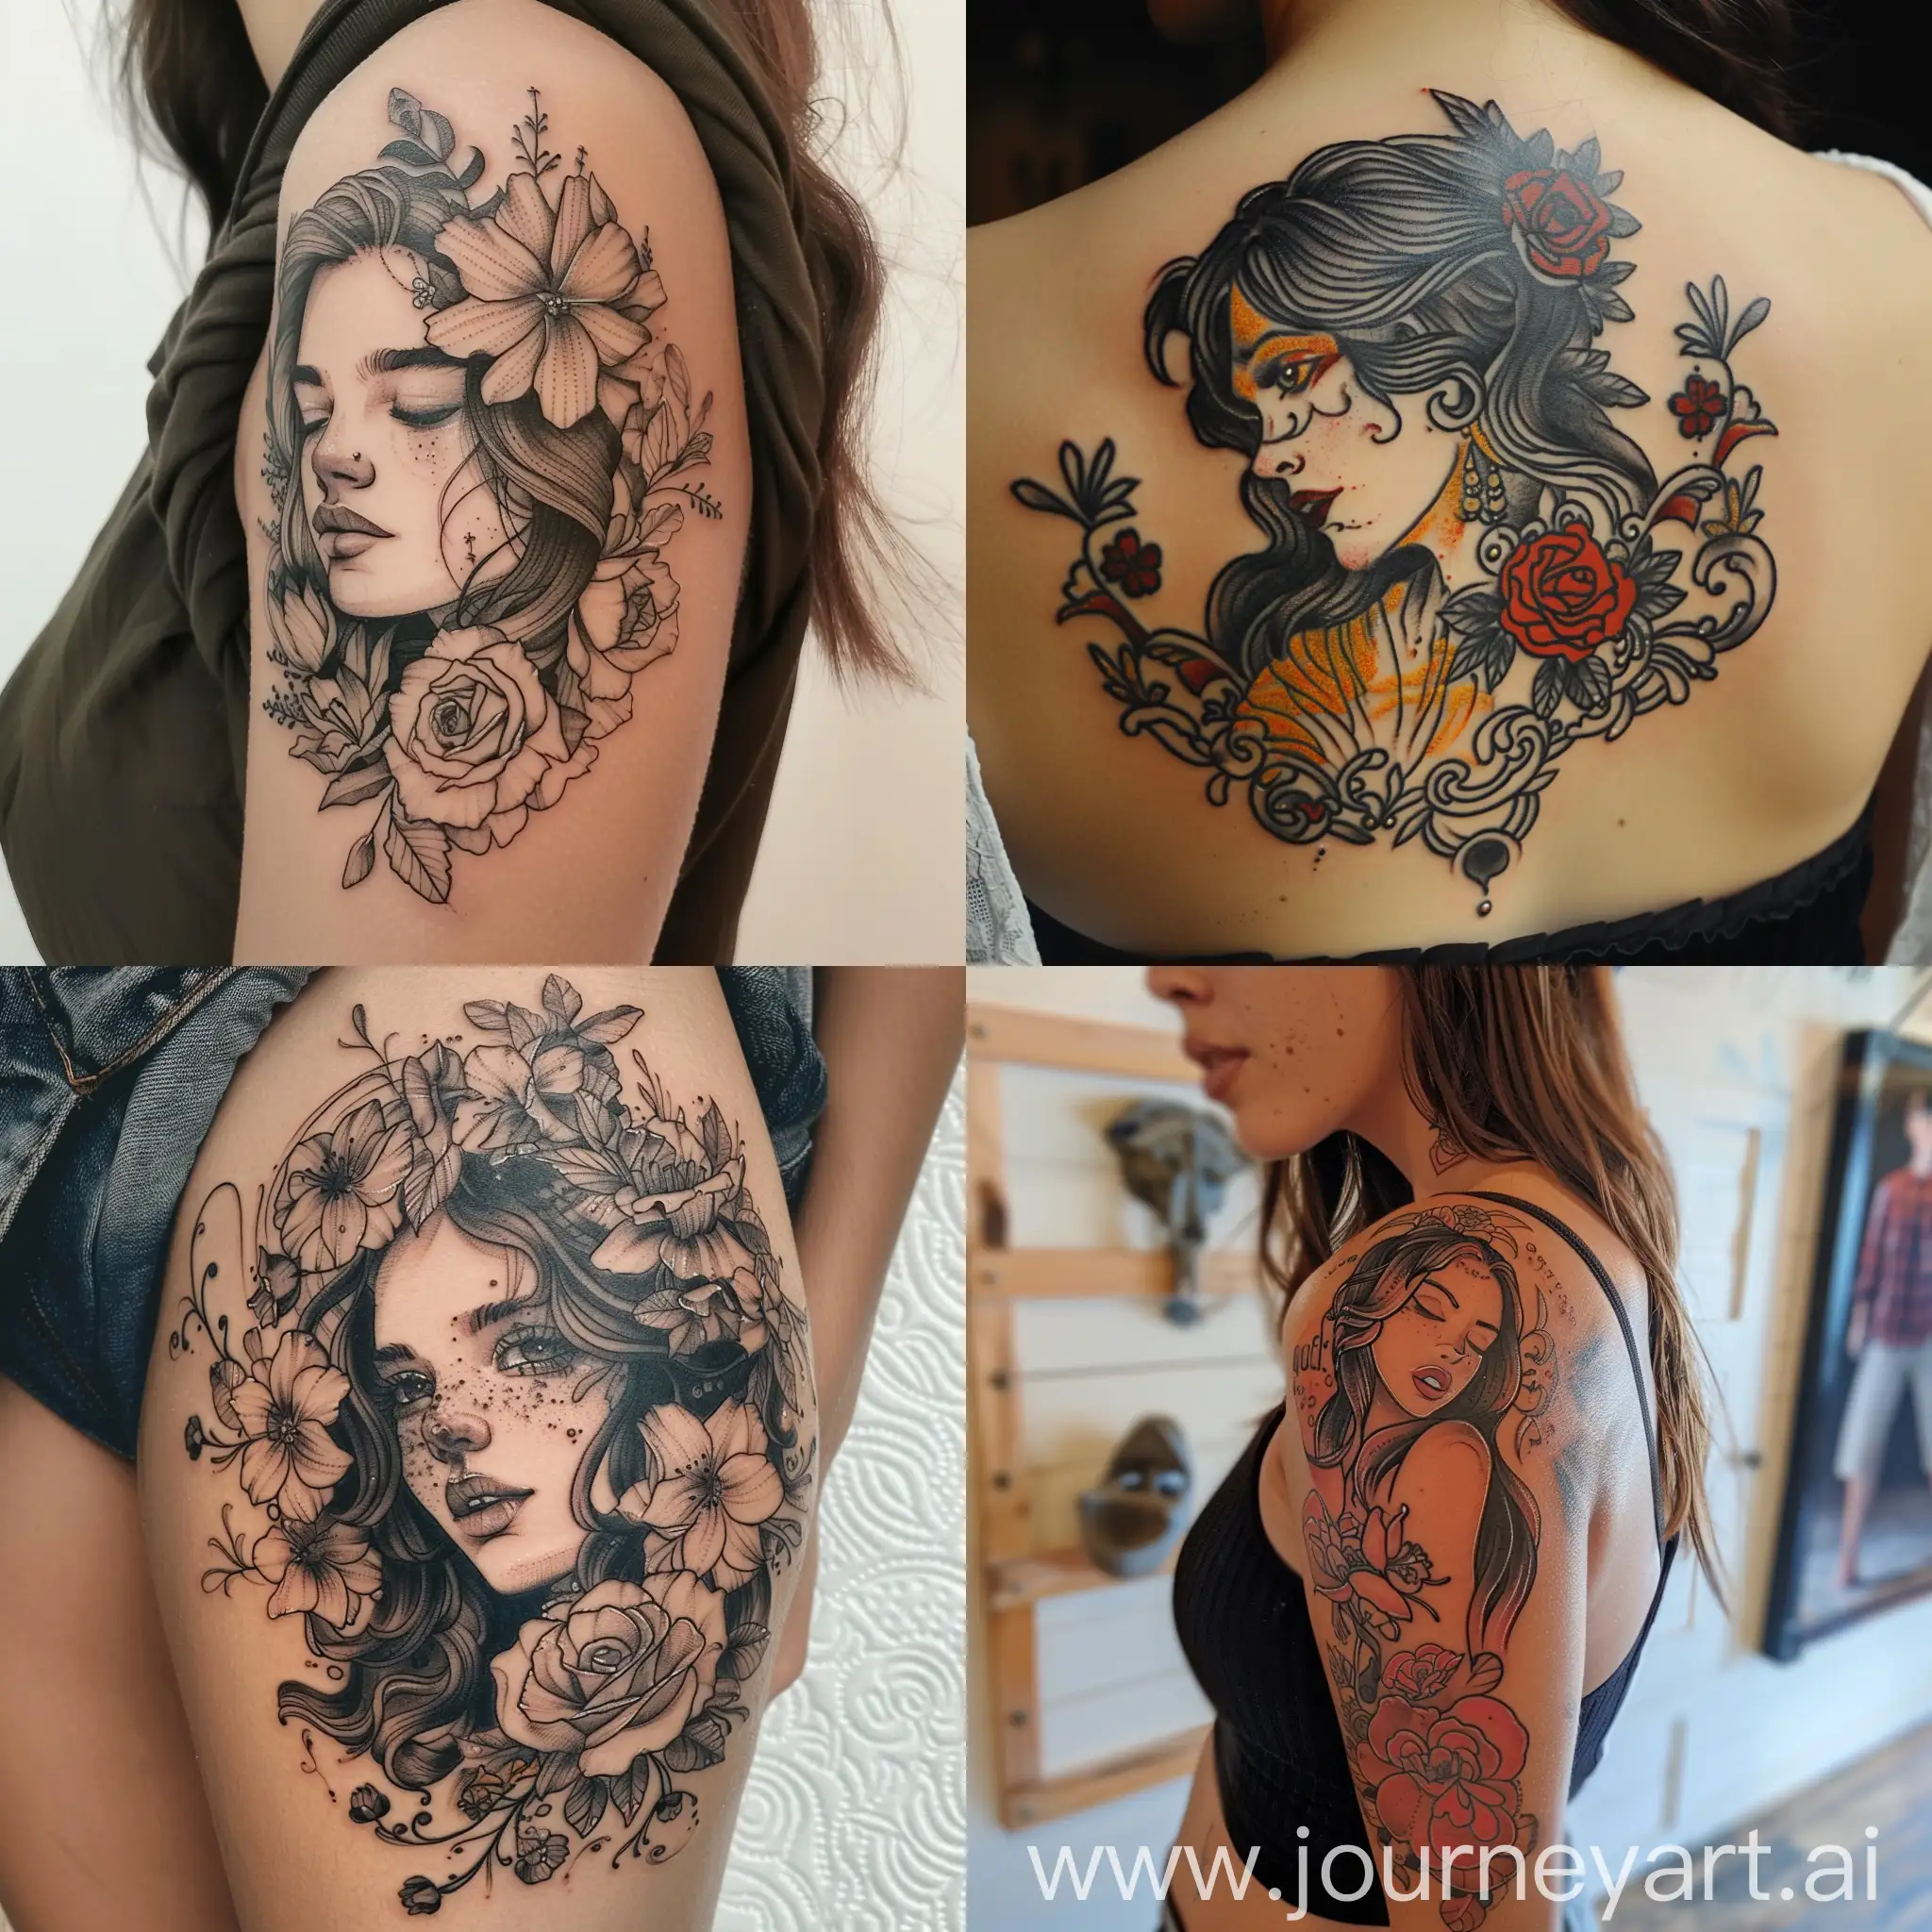 Girl-with-Juiles3-Tattoo-Portrait